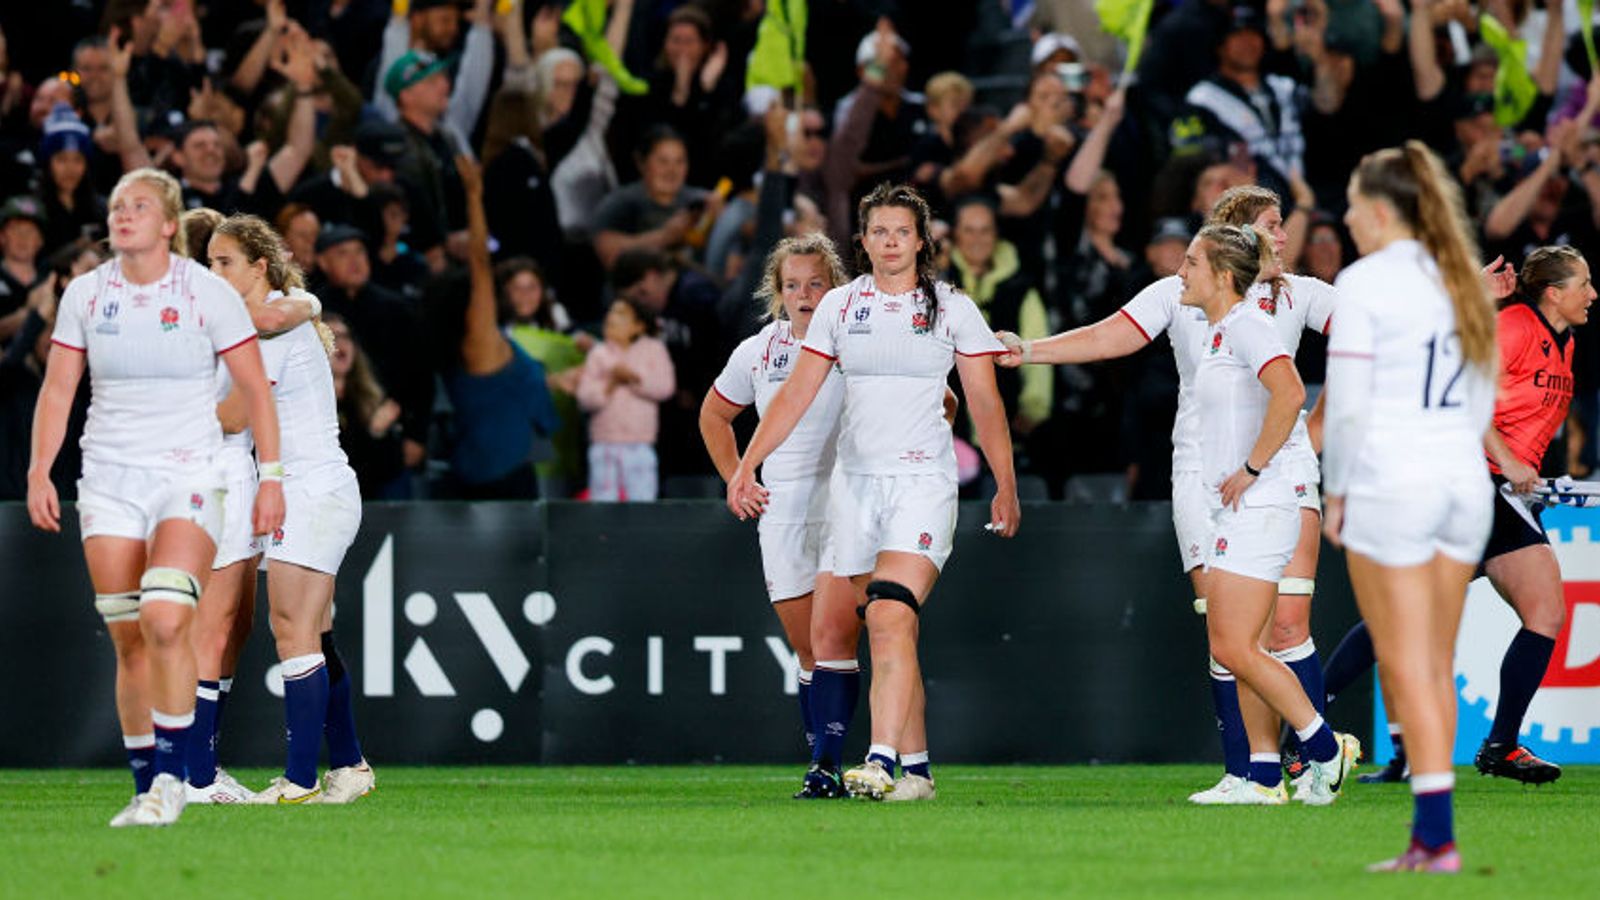 England can realise goal of a sold-out Twickenham for 2025 Rugby World Cup final – now other nations need to support their women